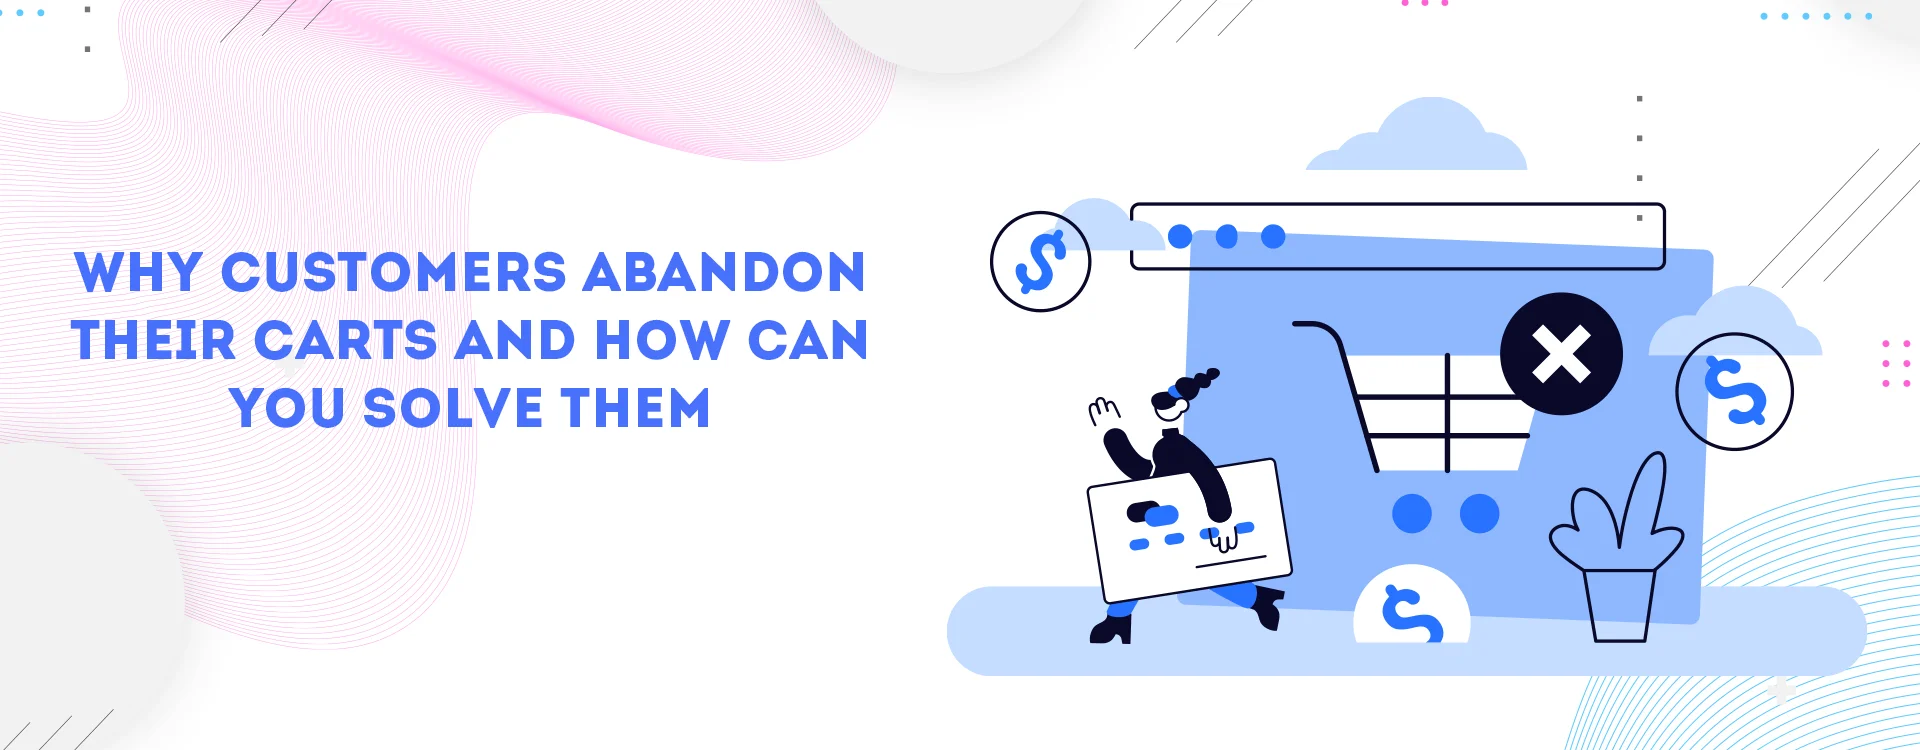 Why does cart abandonment happen and how to handle them?